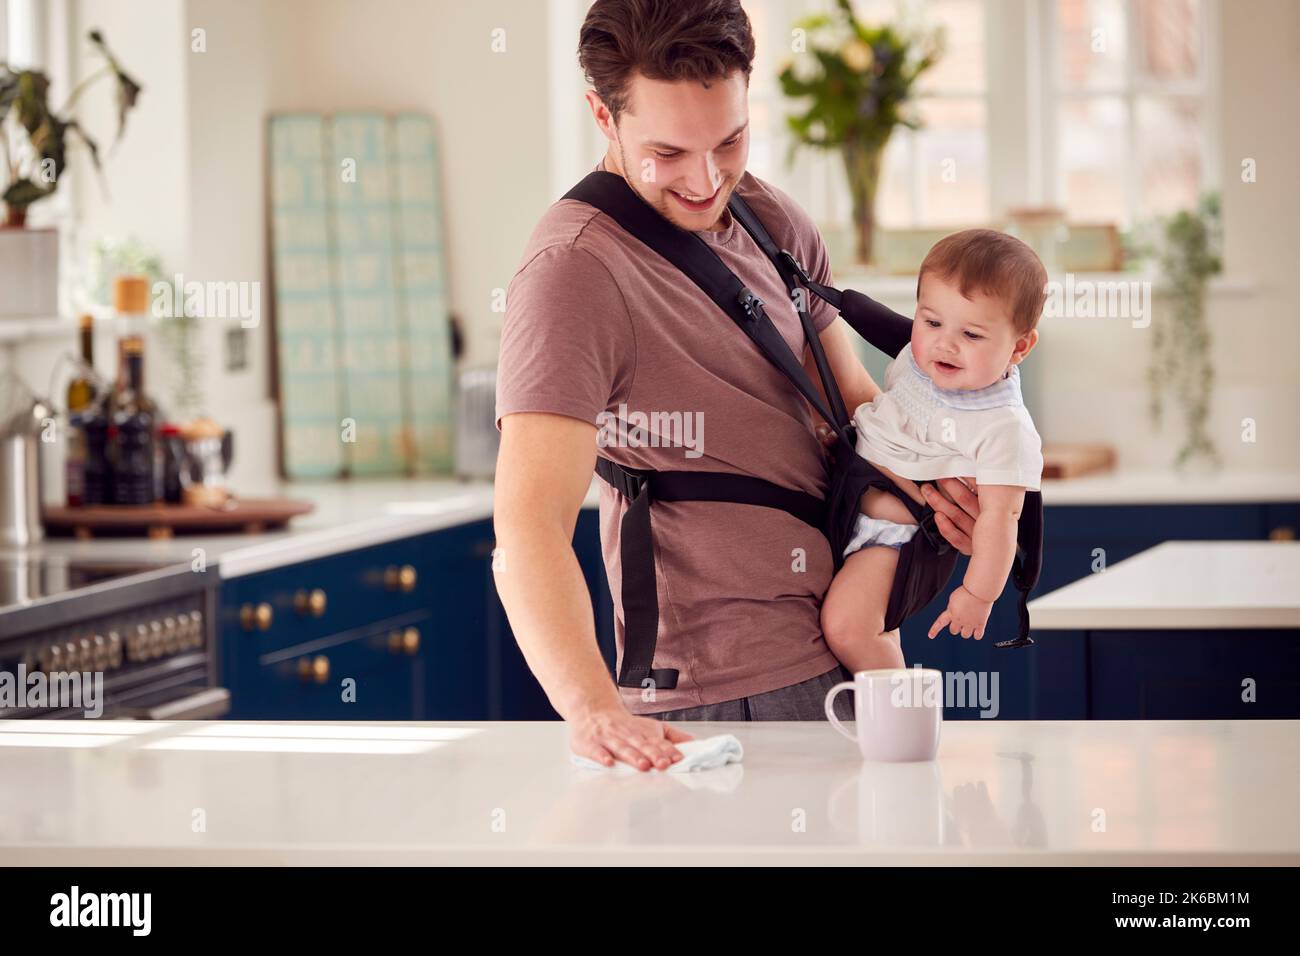 Transgender Father Cleaning Kitchen Looking After Baby Son In Sling Stock Photo